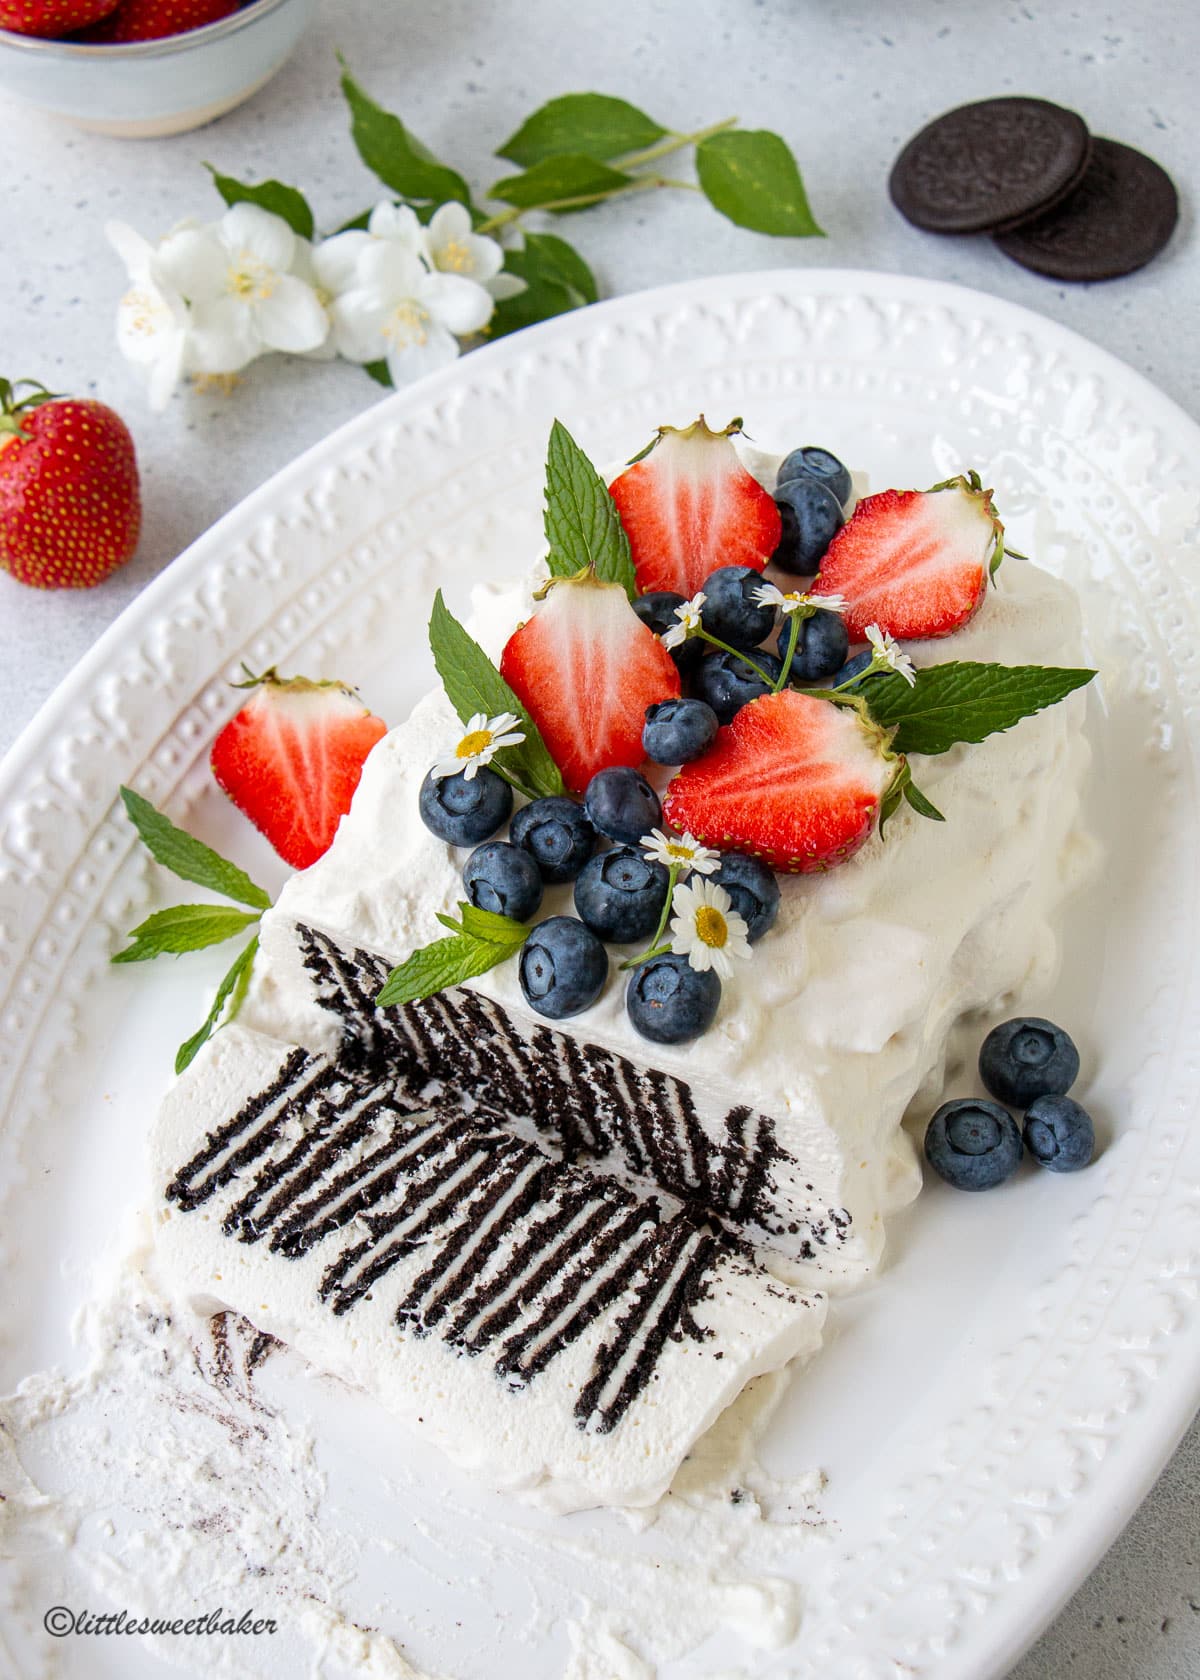 Icebox cake made with Oreos topped with strawberries and blueberries.